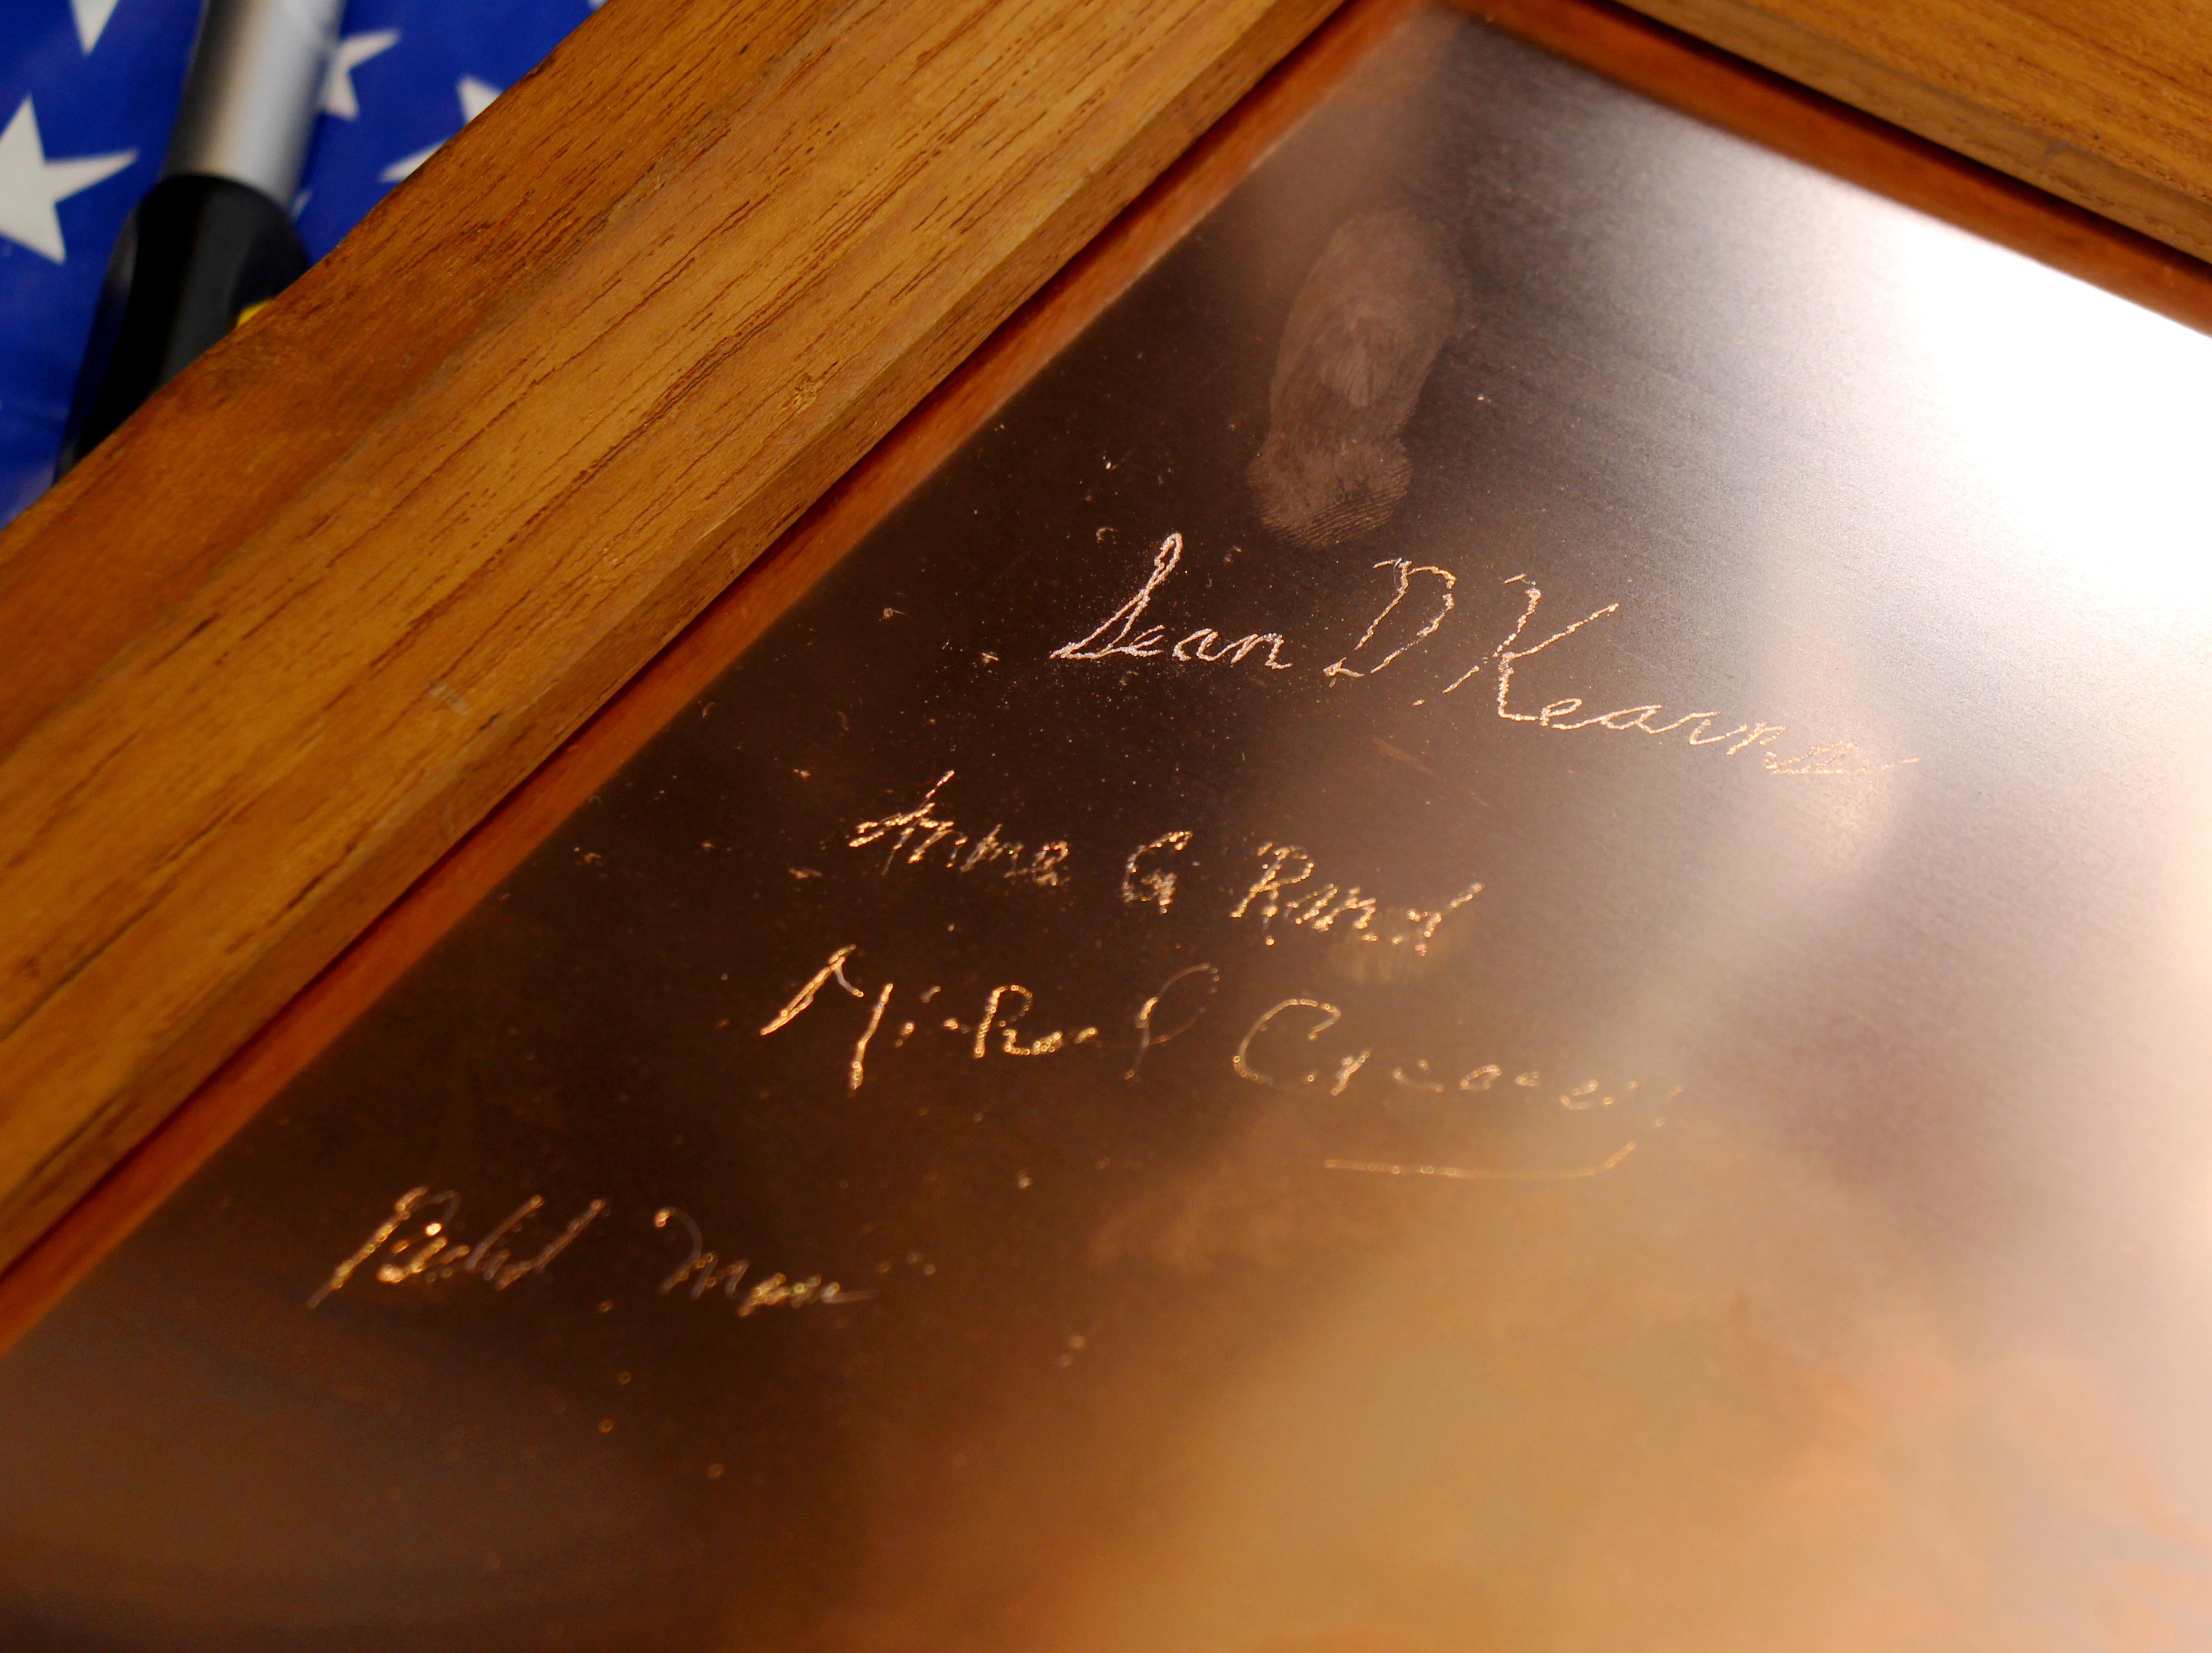 A signed copper sheet that will be placed on USS Constitution's hull during the restoration. [Courtesy USS Constitution Museum]